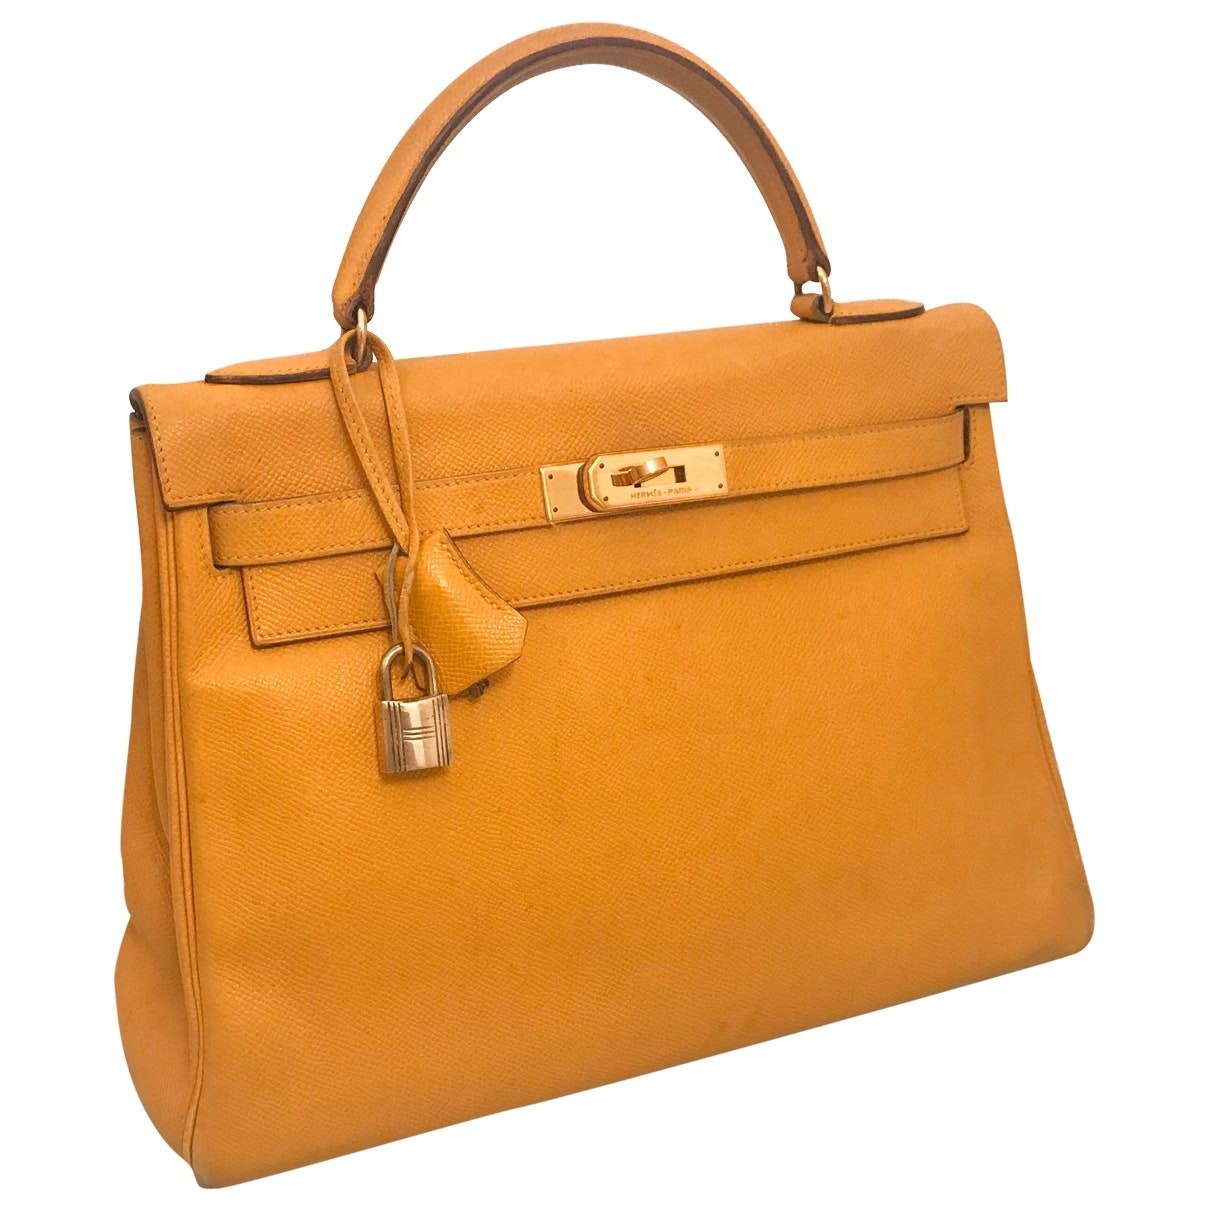 Will people think this is a knock-off Kelly? I love this Tory Burch Lee  Radziwill bag, but couldn't help overlook the similarities between it and  the Hermes Kelly. While I do love